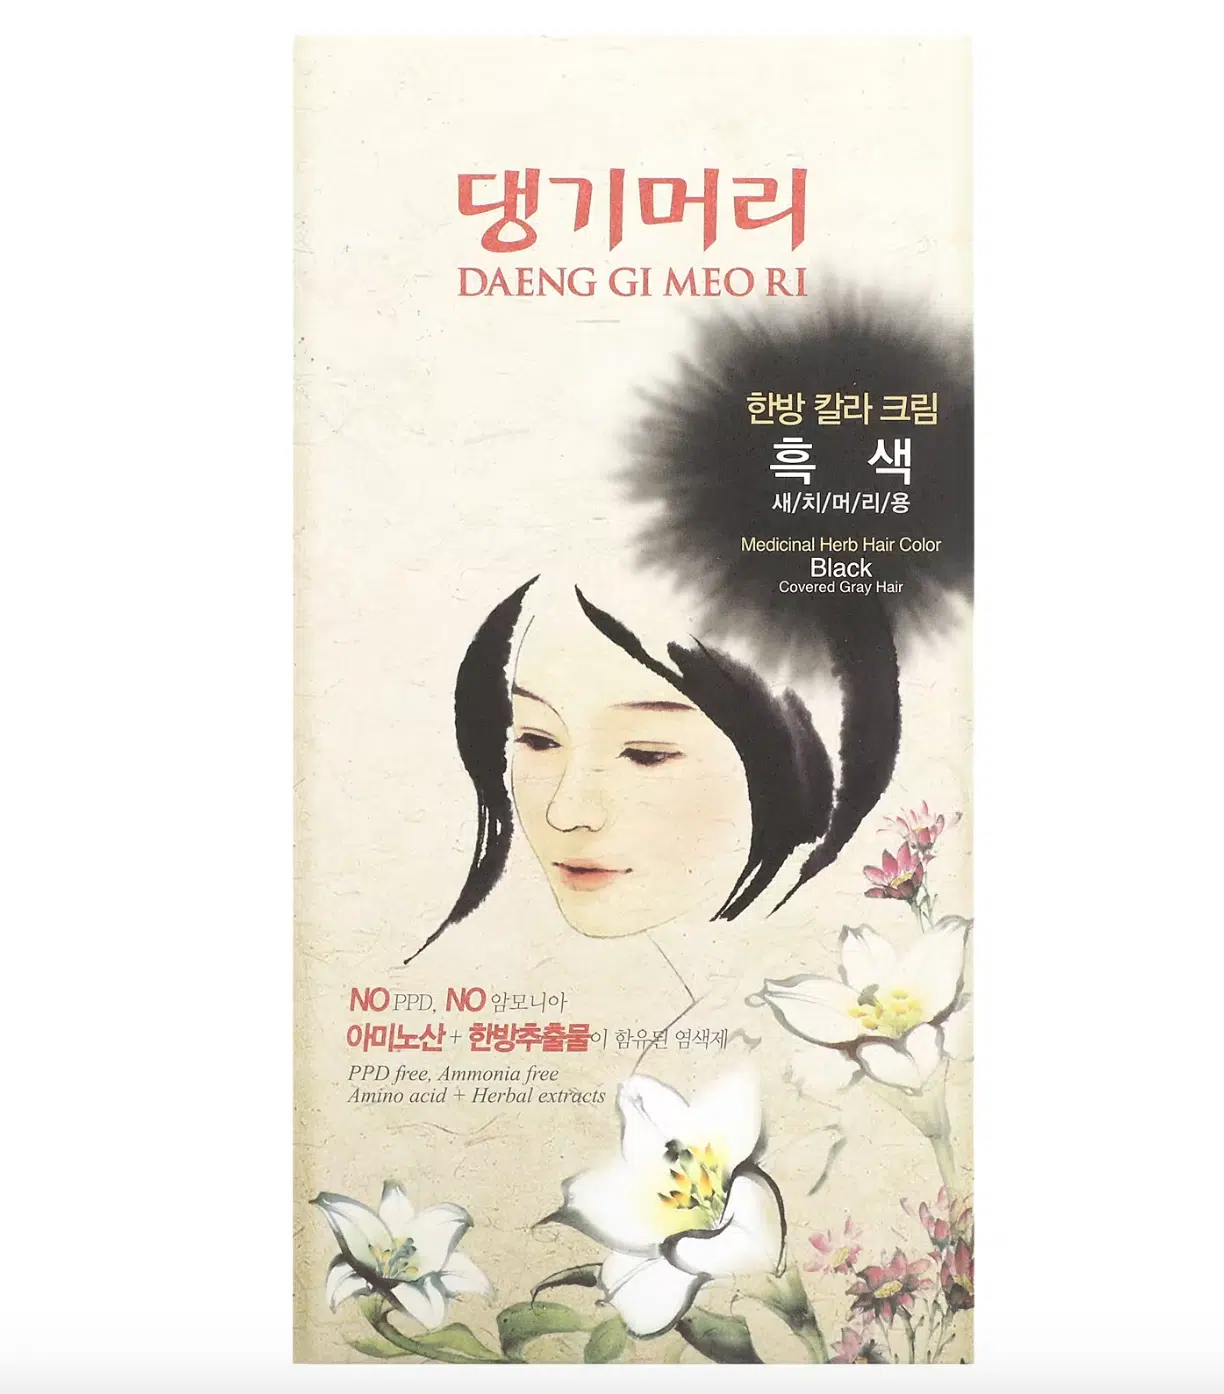 Asian hair dye, by Blogger What The Fab 